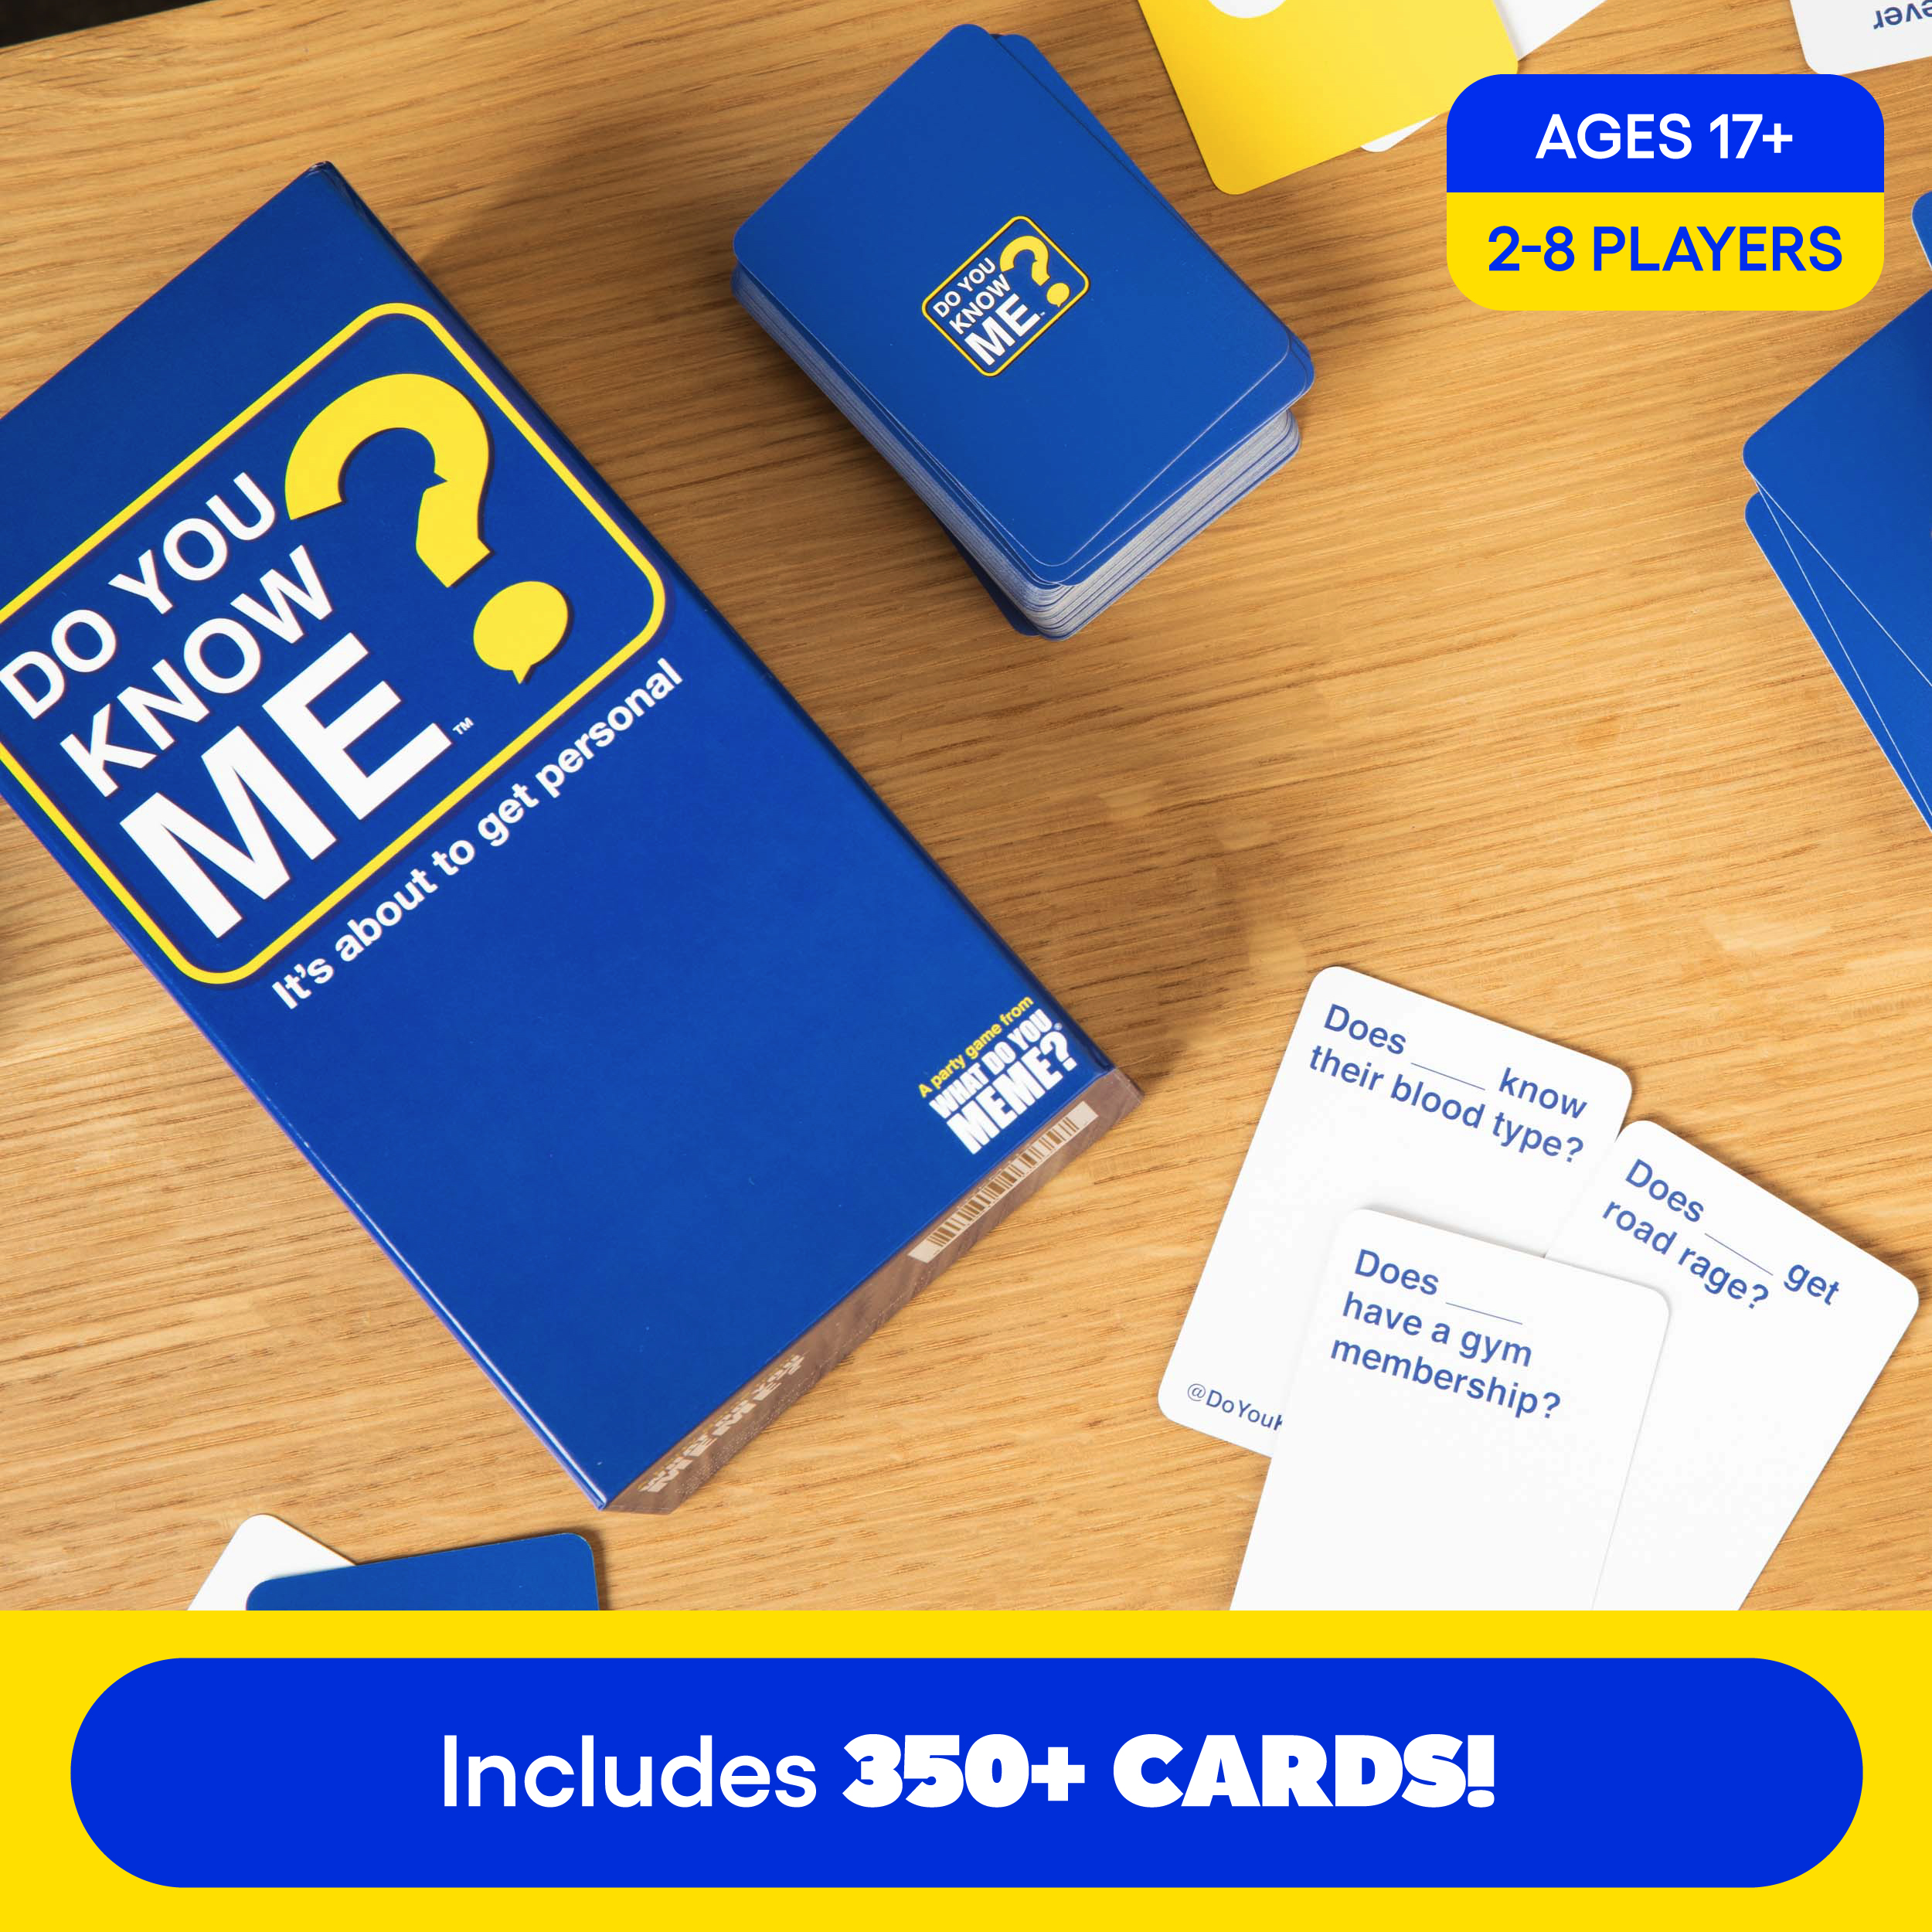 Do You Know Me? the Card Game that Puts You and Your Friends in the Hot Seat by What Do You Meme? - image 5 of 10